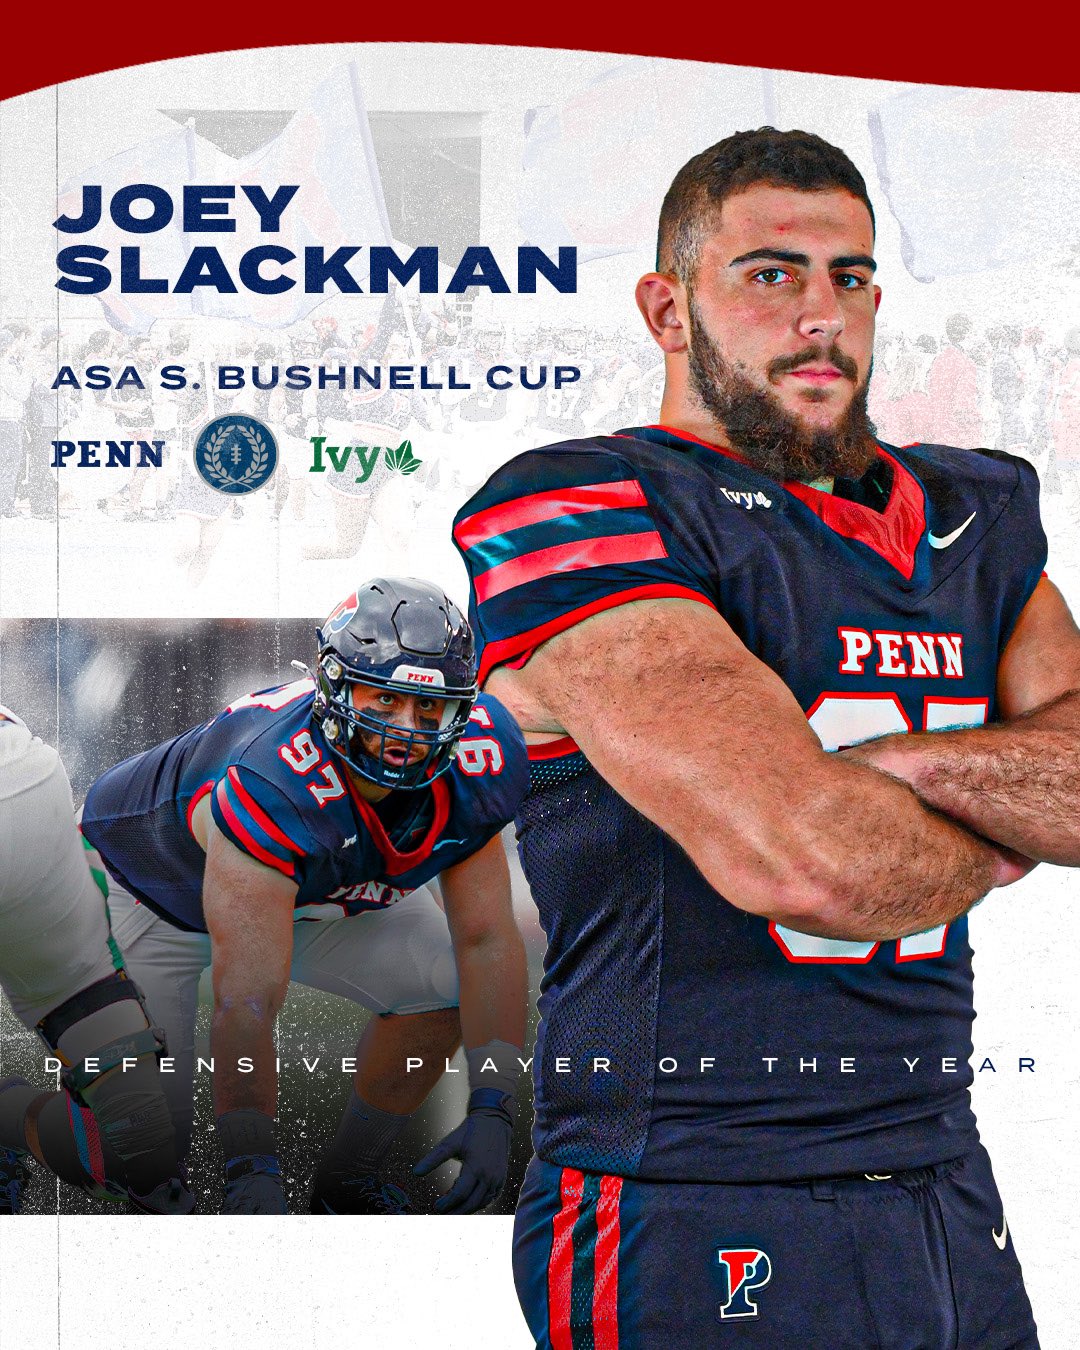 Penn Football on X: 𝙎𝙇𝘼𝘾𝙆𝙈𝘼𝙉 𝙄𝙈𝙈𝙊𝙍𝙏𝘼𝙇𝙄𝙕𝙀𝘿  @JoeySlackman is Penn's first Asa S. Bushnell Cup recipient since 2015  after being voted @IvyLeague Defensive Player of the Year for the 2023  season! #FightOnPenn x #